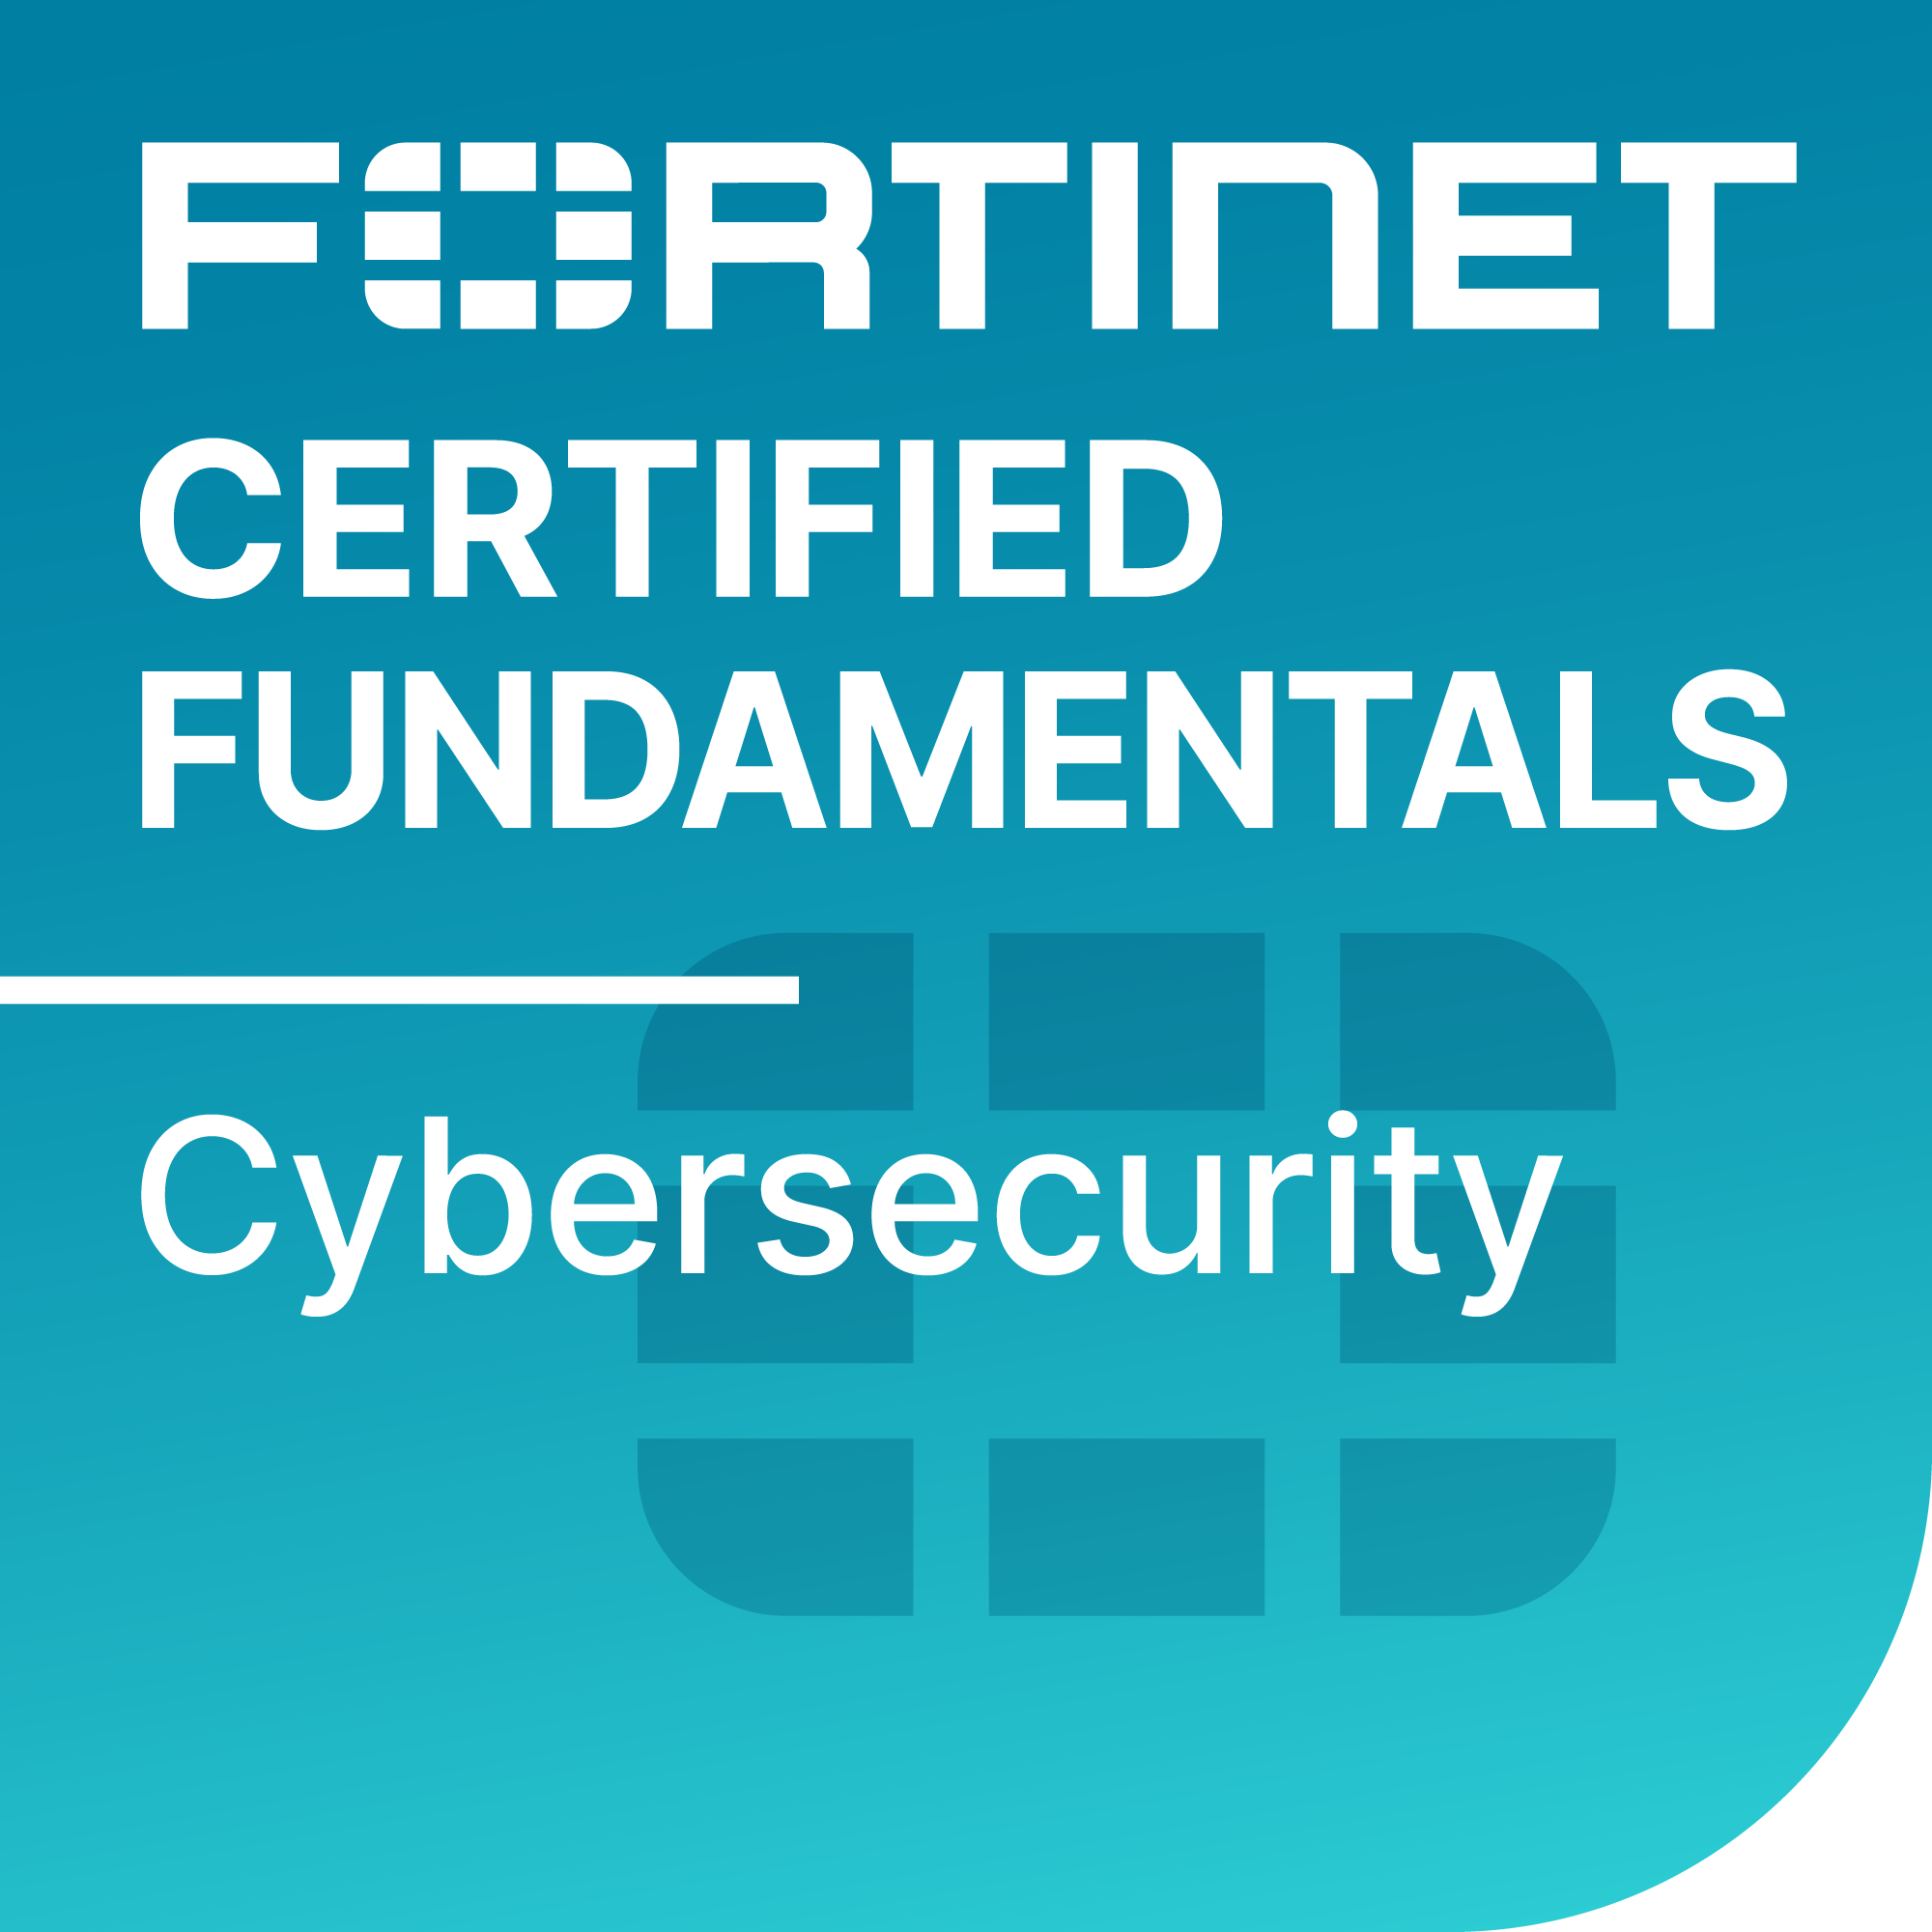 Fortinet Certified Fundamentals badge